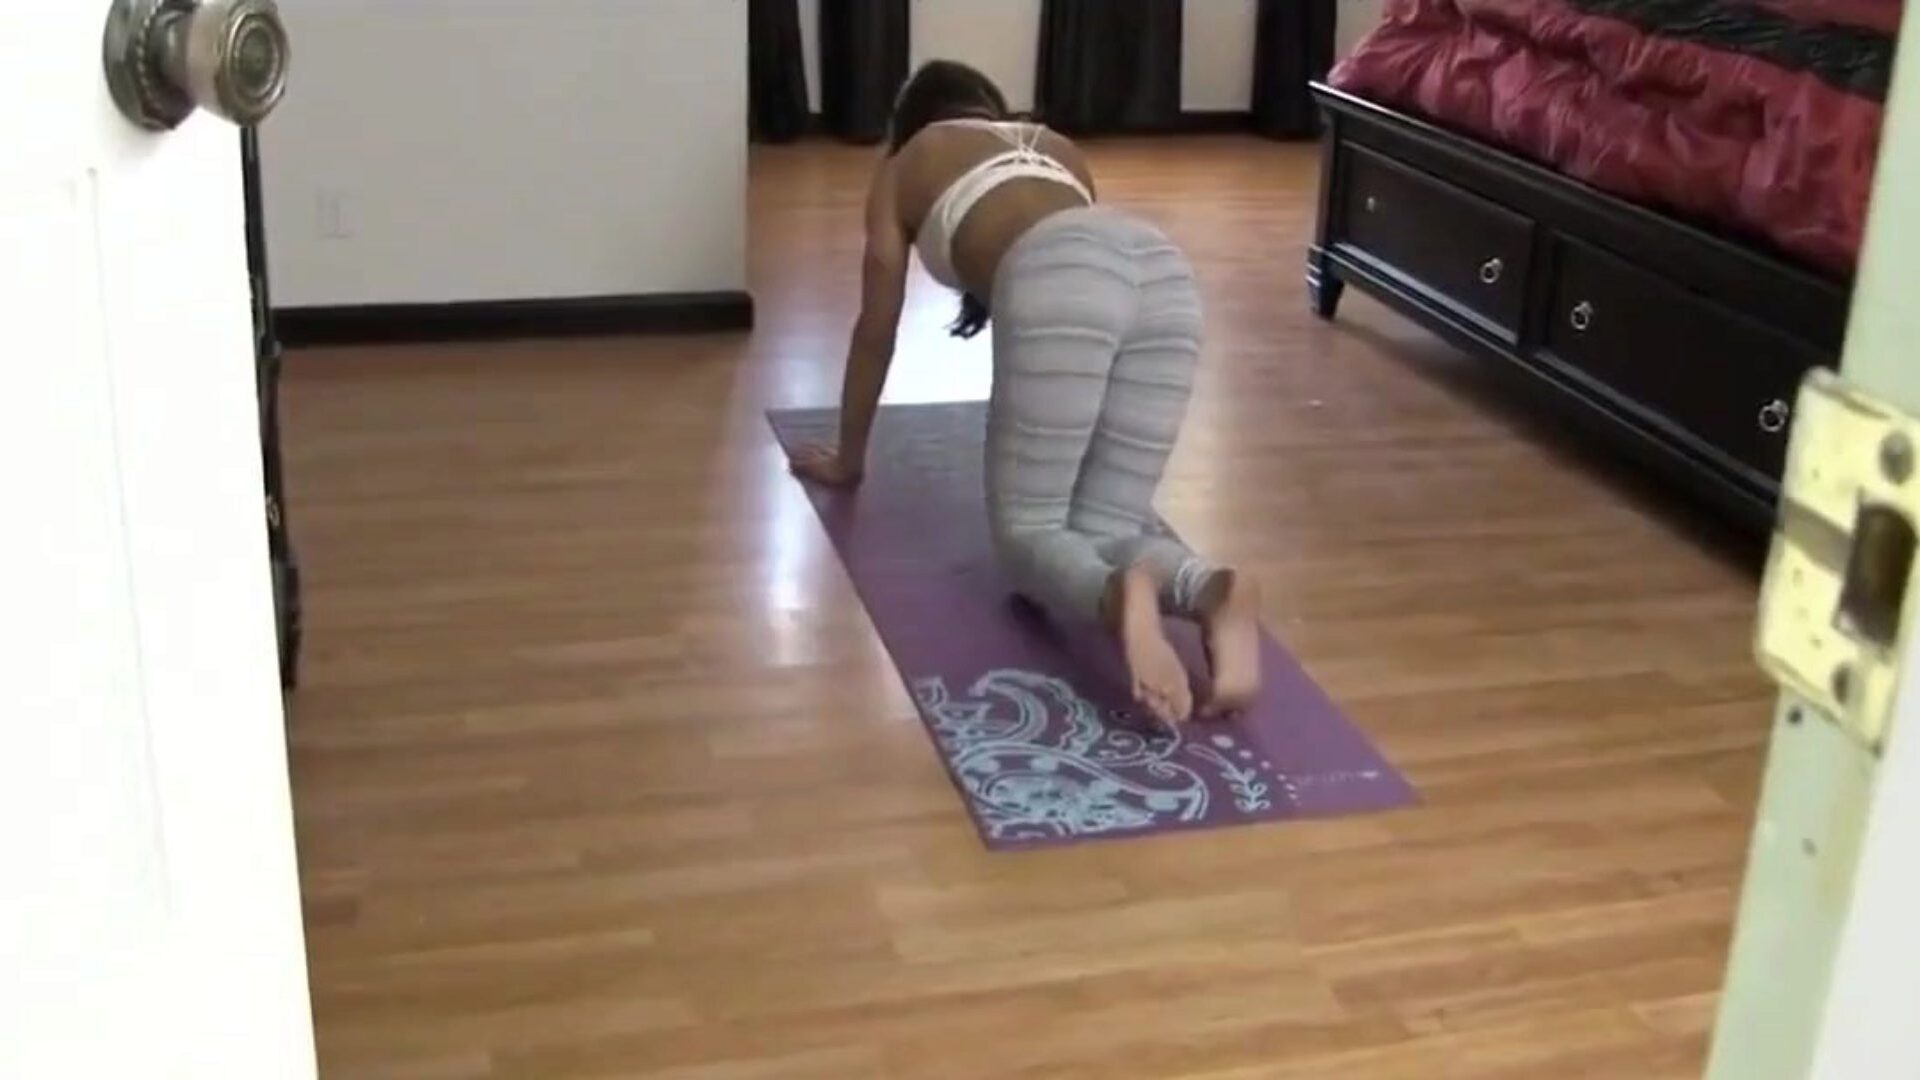 Mthrfkr – Stepson Helps Mom with Her Yoga Exercises Watch Mthrfkr – Stepson Helps Mom with Her Yoga Exercises Roleplay clip on xHamster - the ultimate selection of free-for-all Son Fucks & mother I'd like to fuck HD pornography tube videos